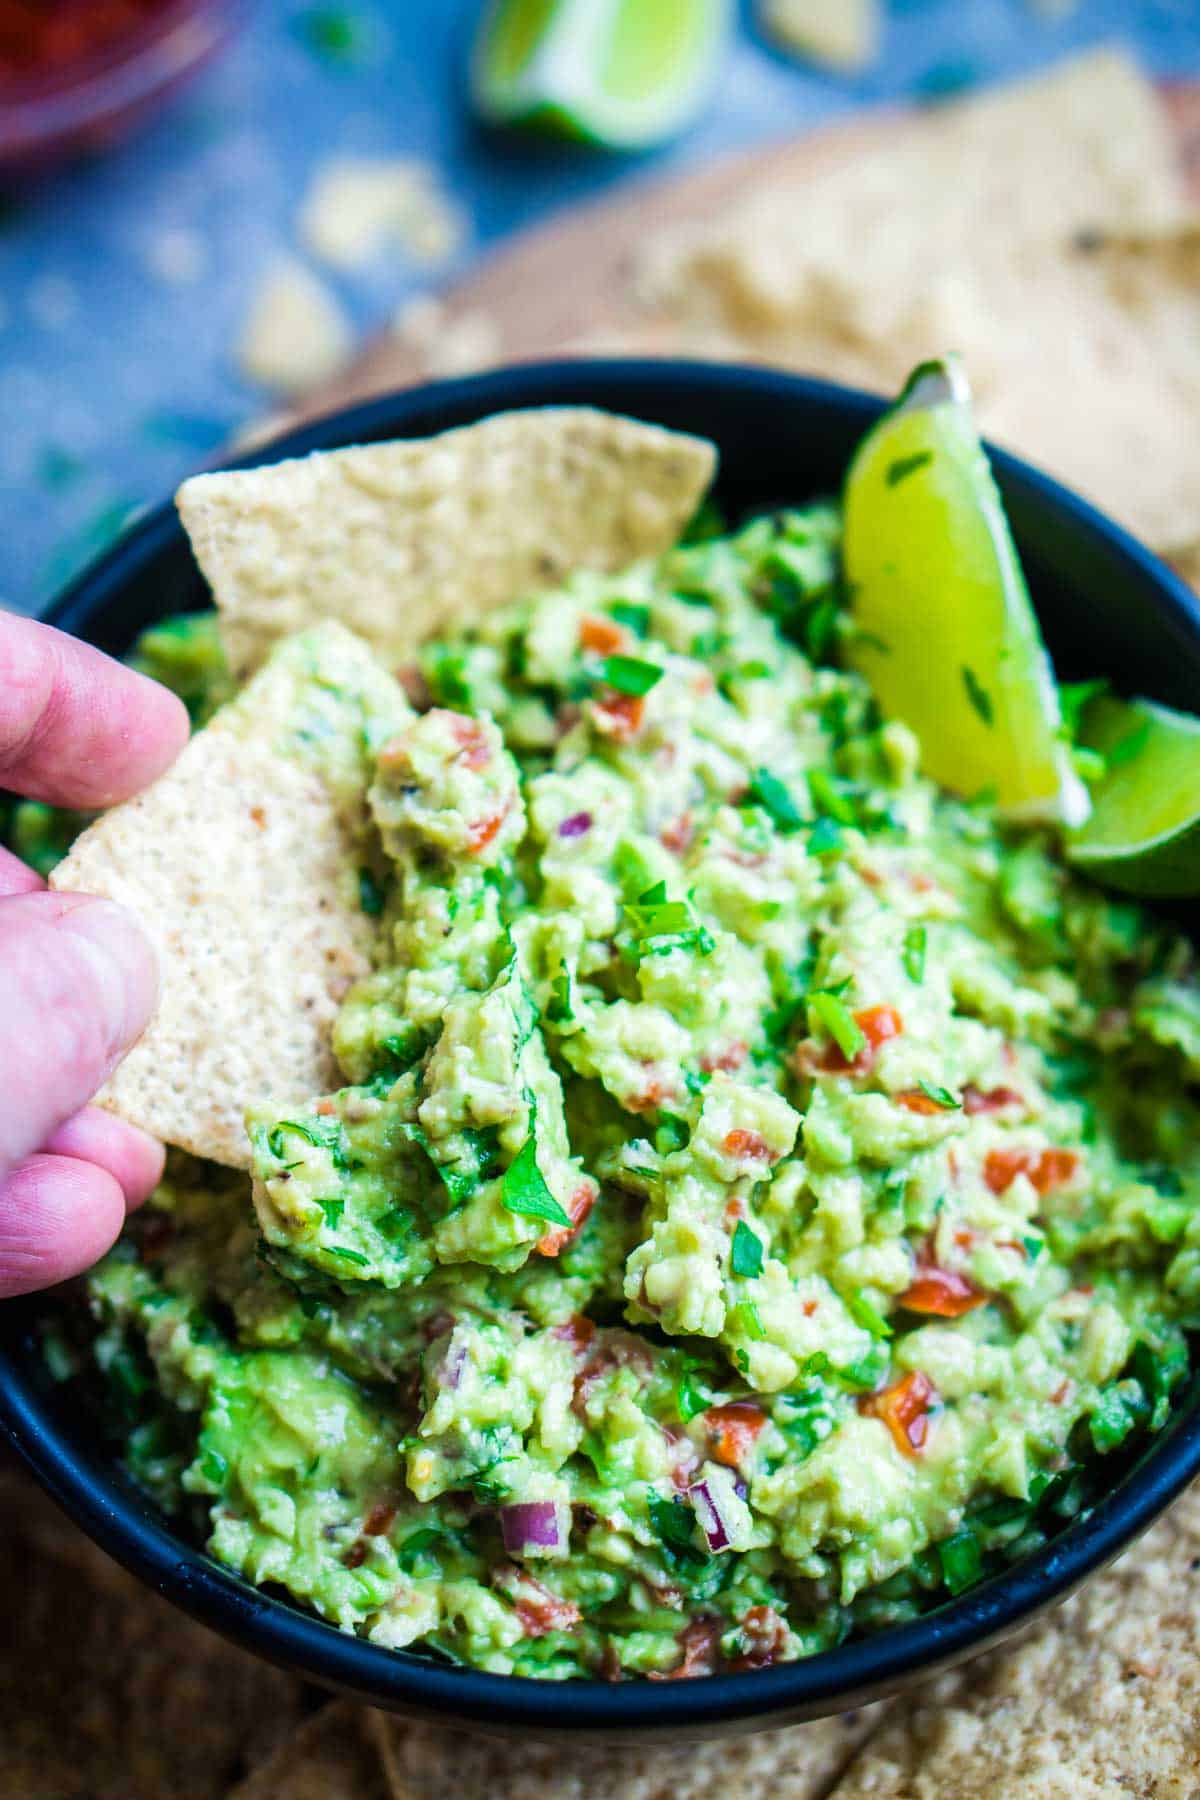 tortilla chip is dunked into bowl of guacamole